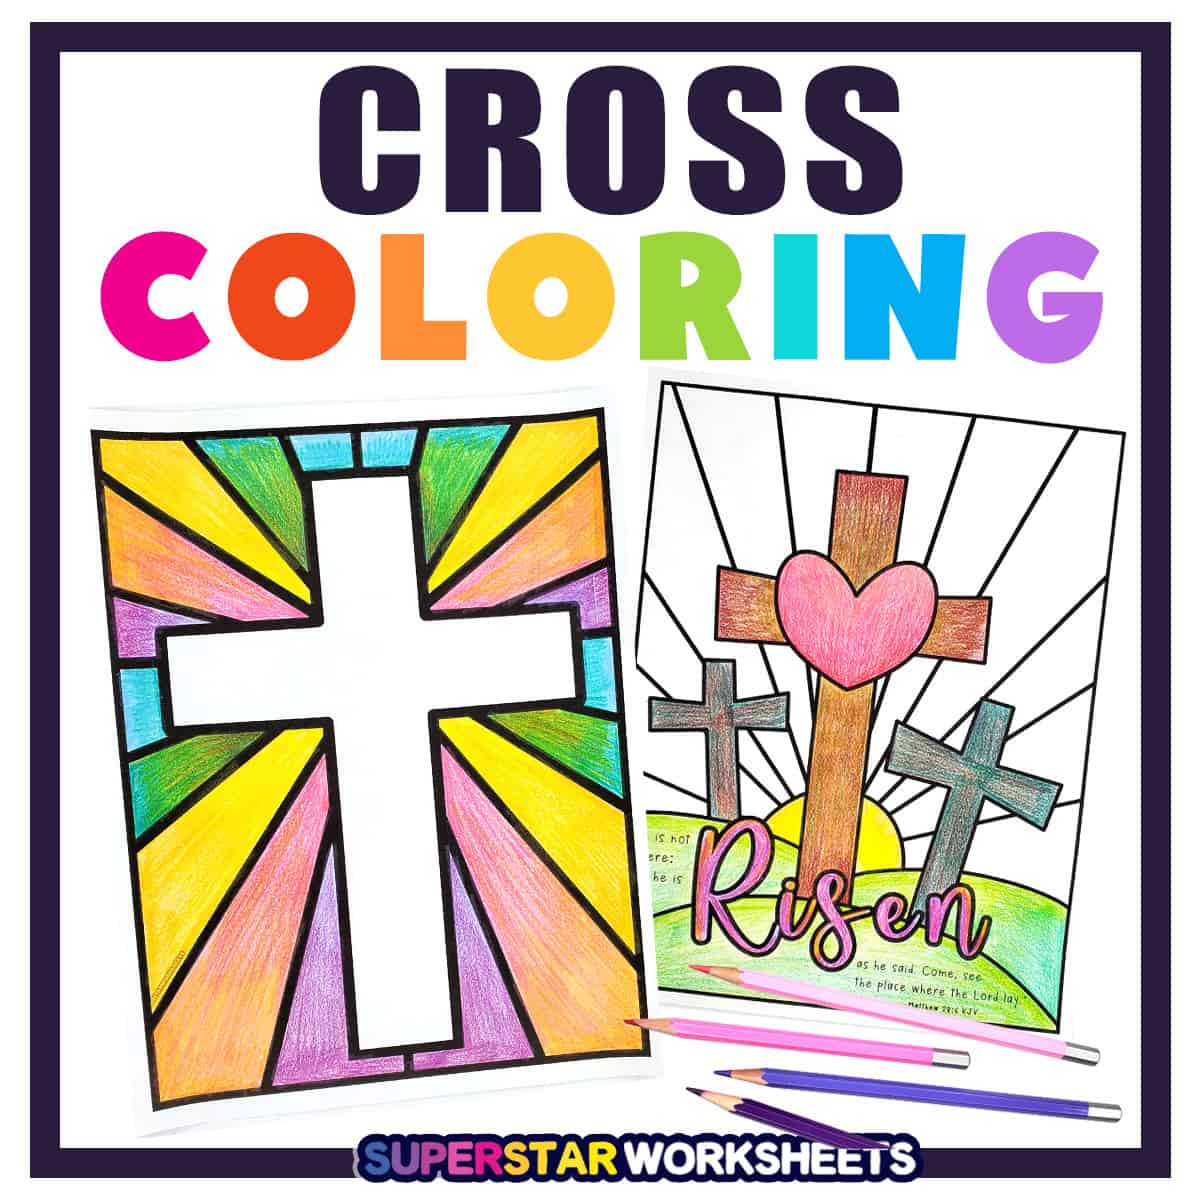 jesus on cross coloring page